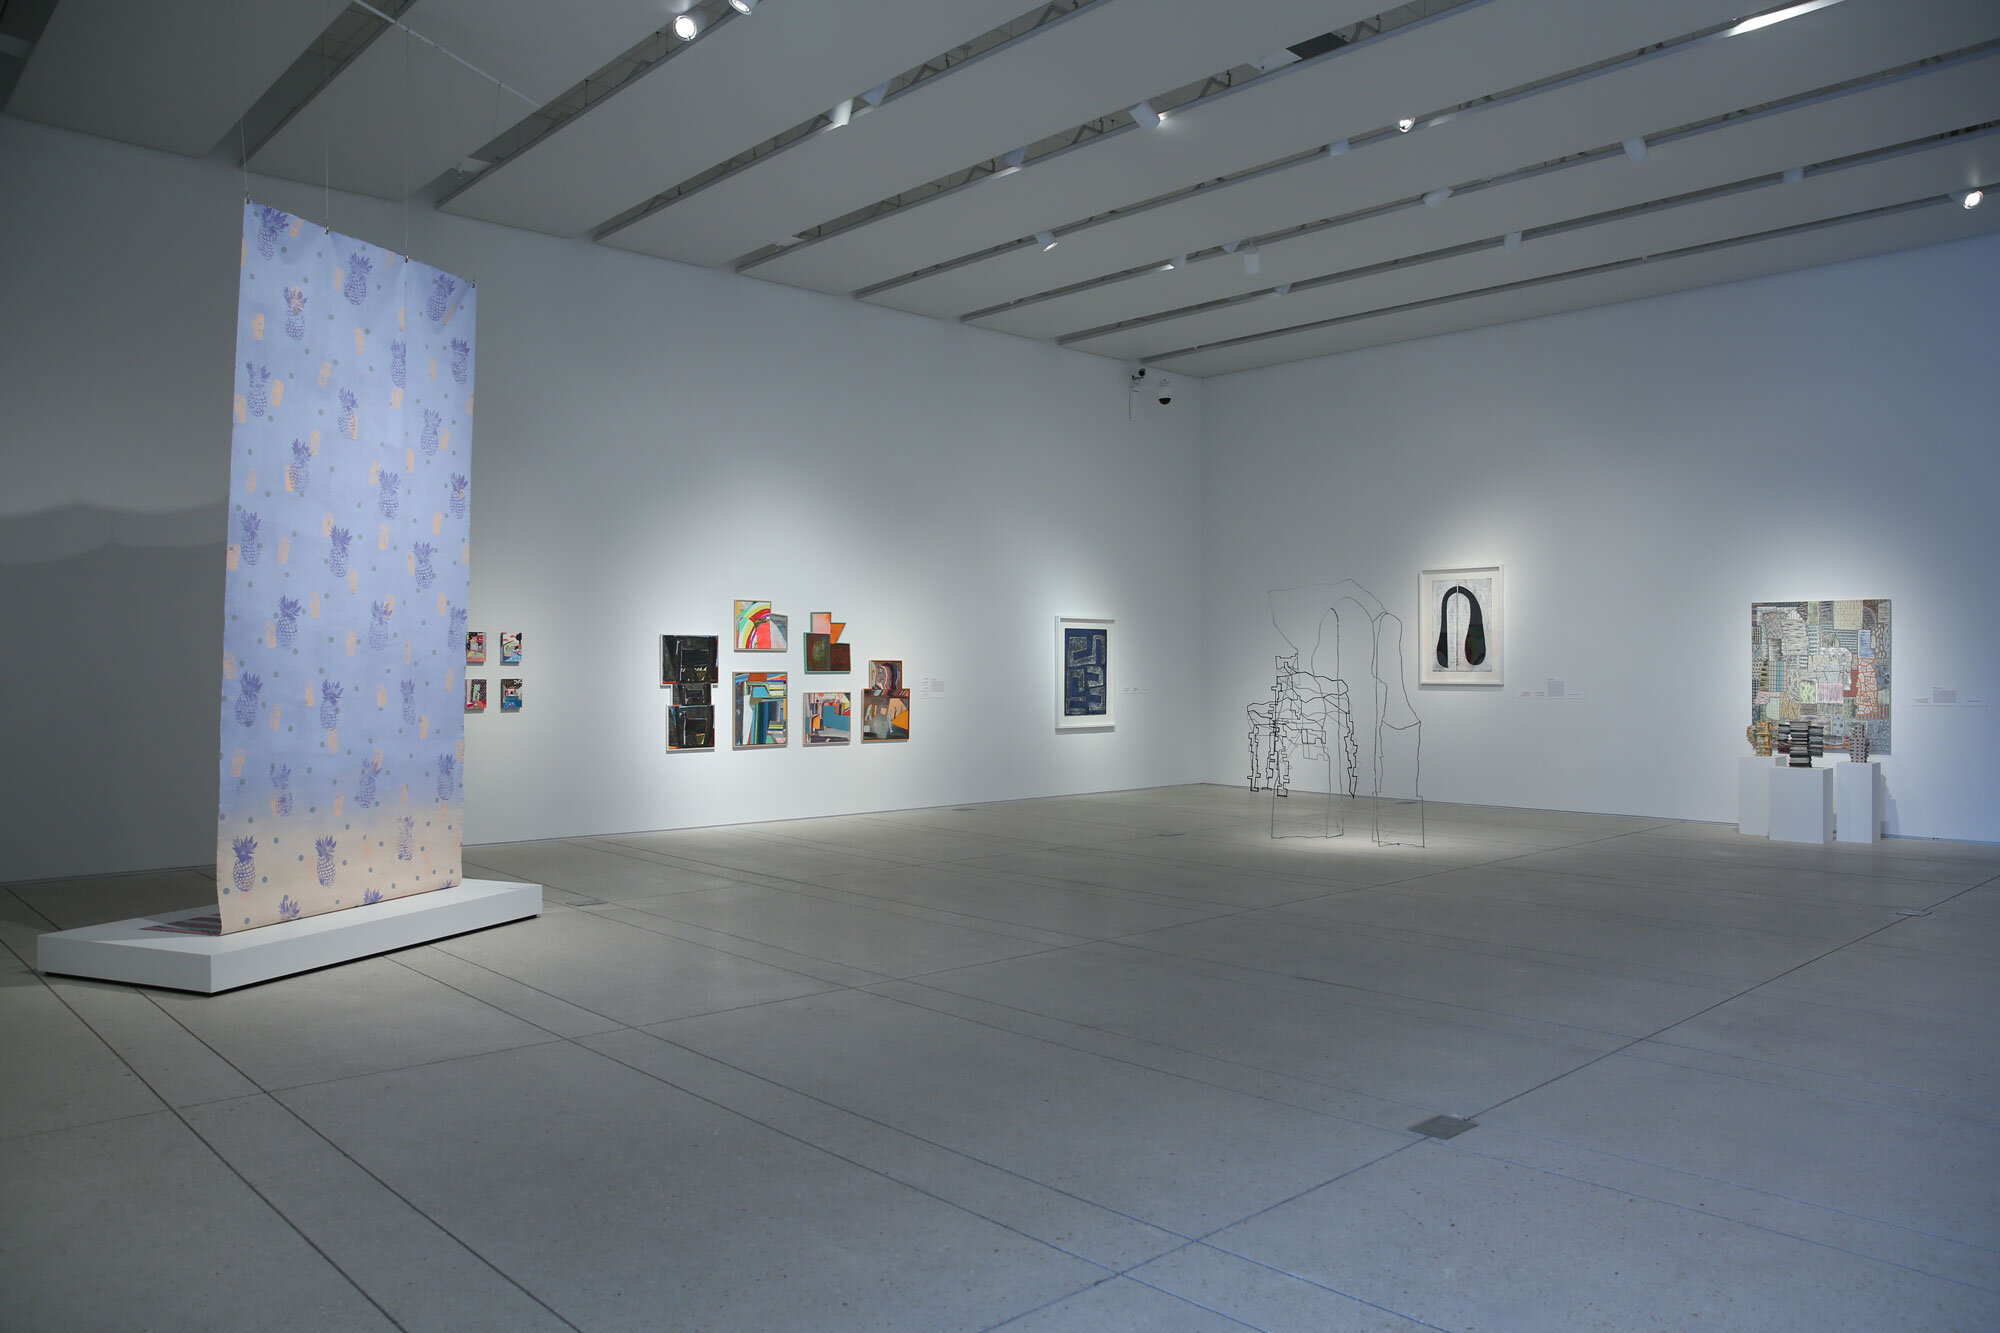 Installation View of "Yesterday Was So Long Ago II"